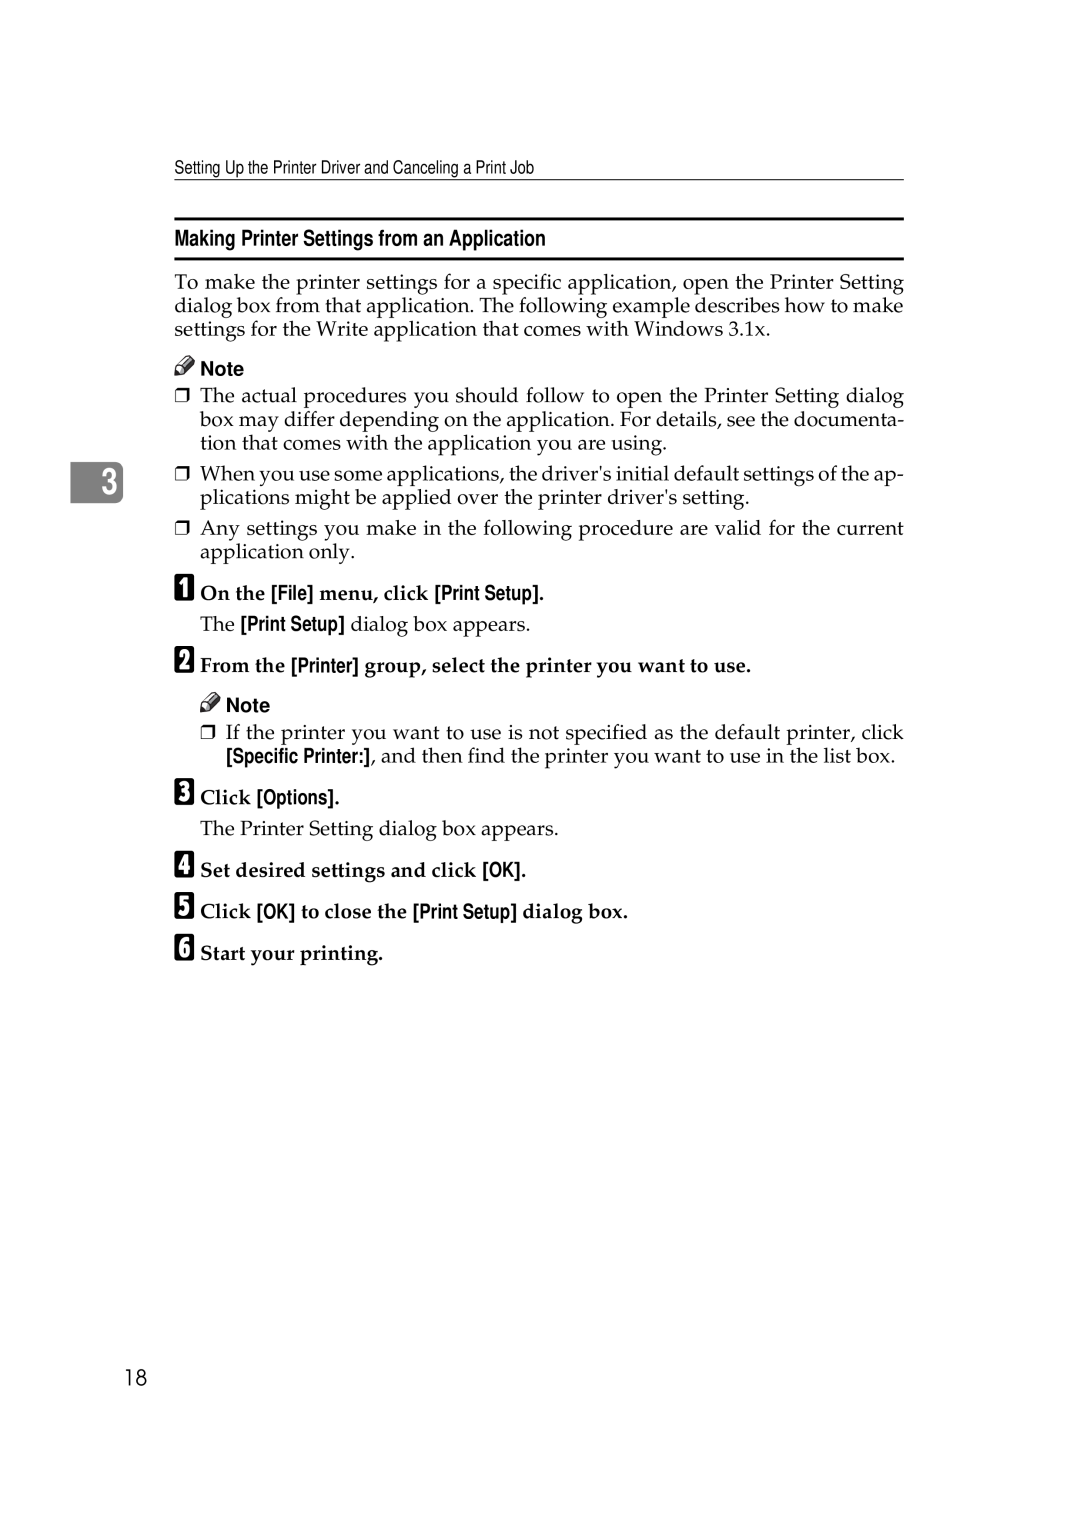 Ricoh Aficio AP2700 operating instructions Making Printer Settings from an Application, C Click Options 